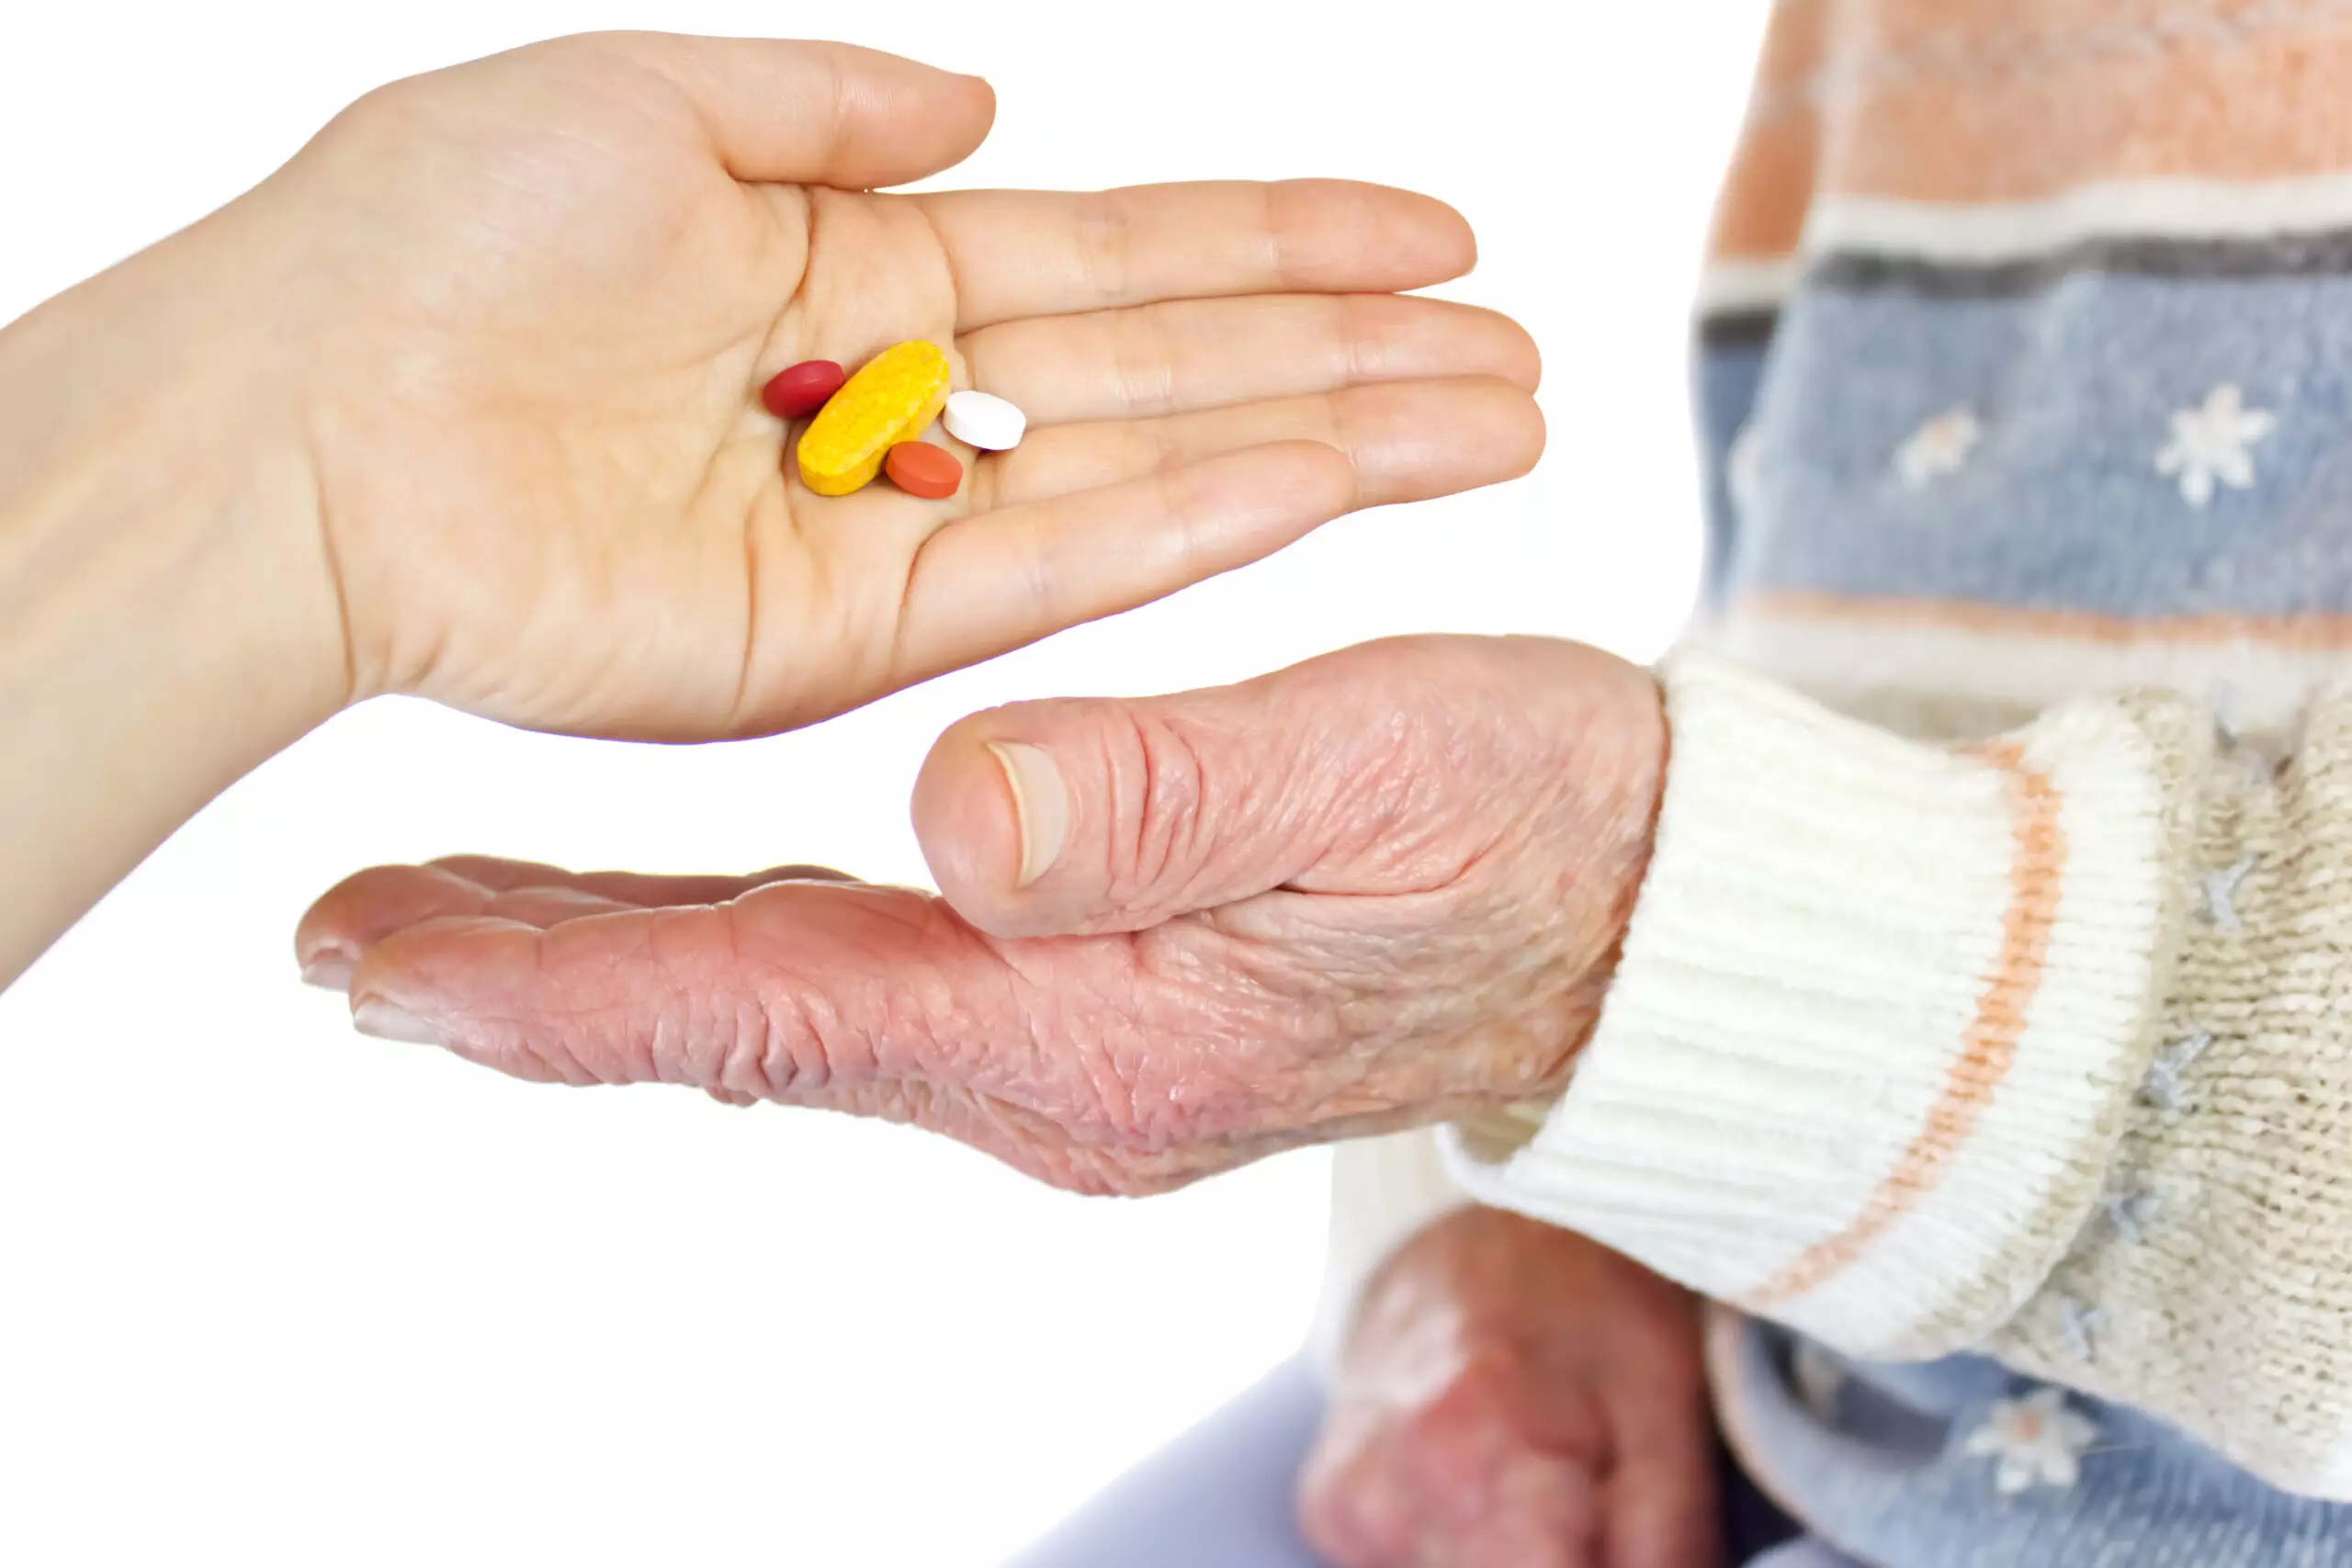 Hand giving medication to elderly person.